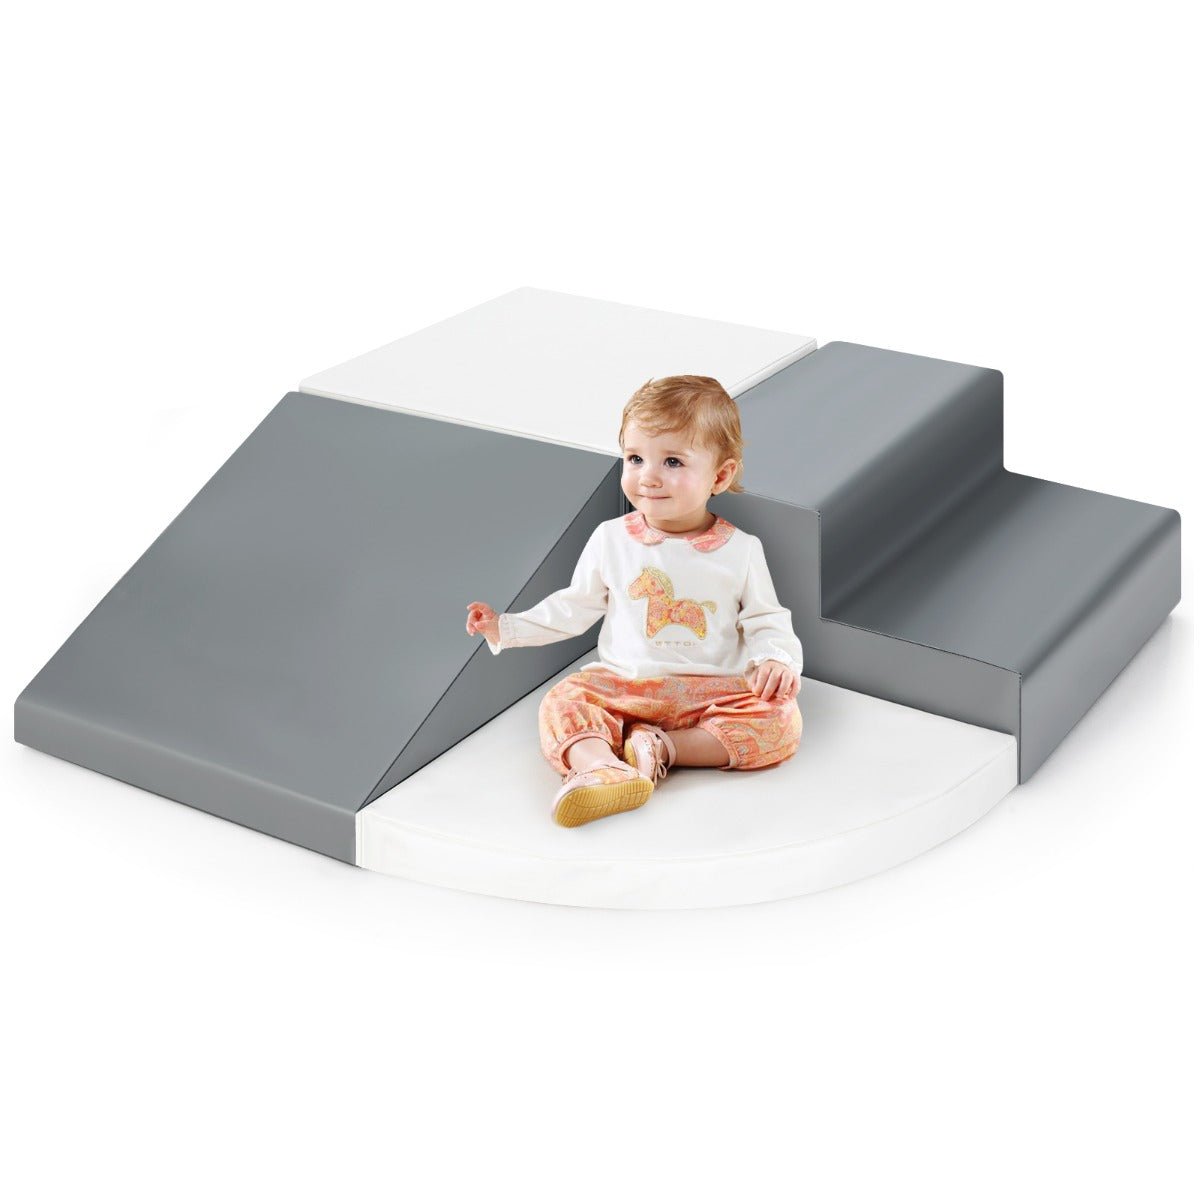 Children's Climbing Blocks with PU Leather Surface